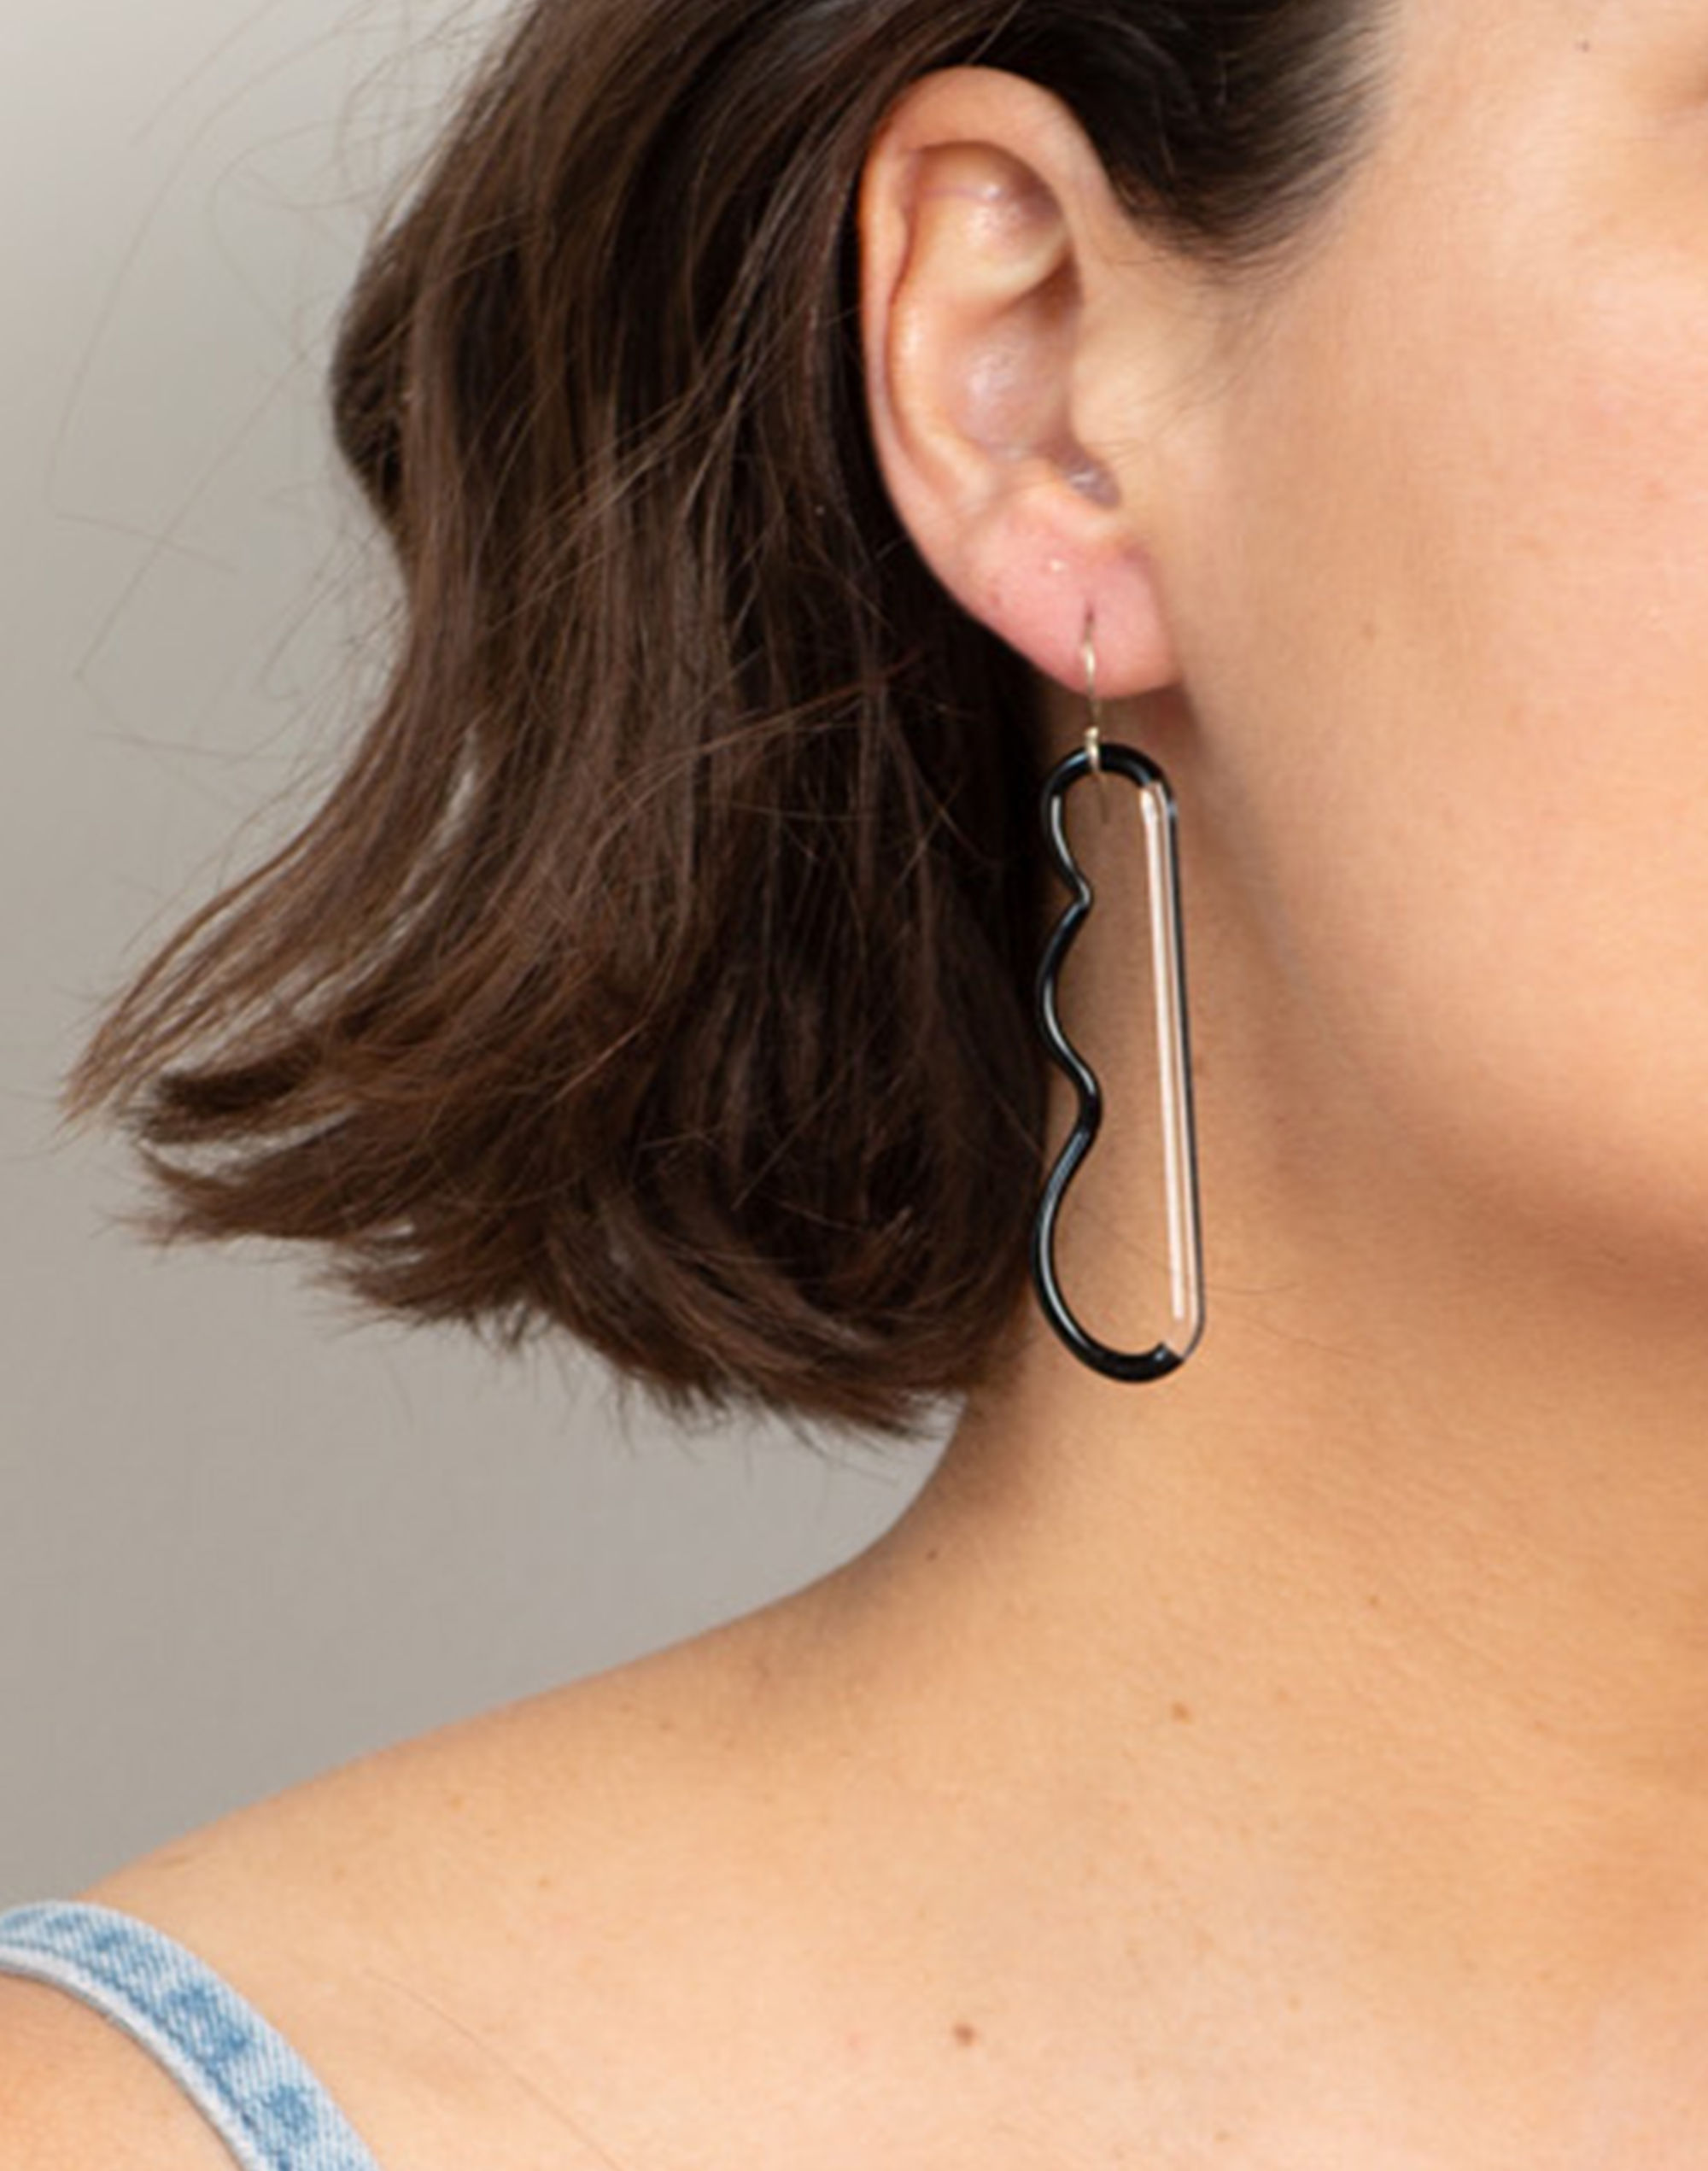 Jane D'Arensbourg Wave and Clear Glass Earrings